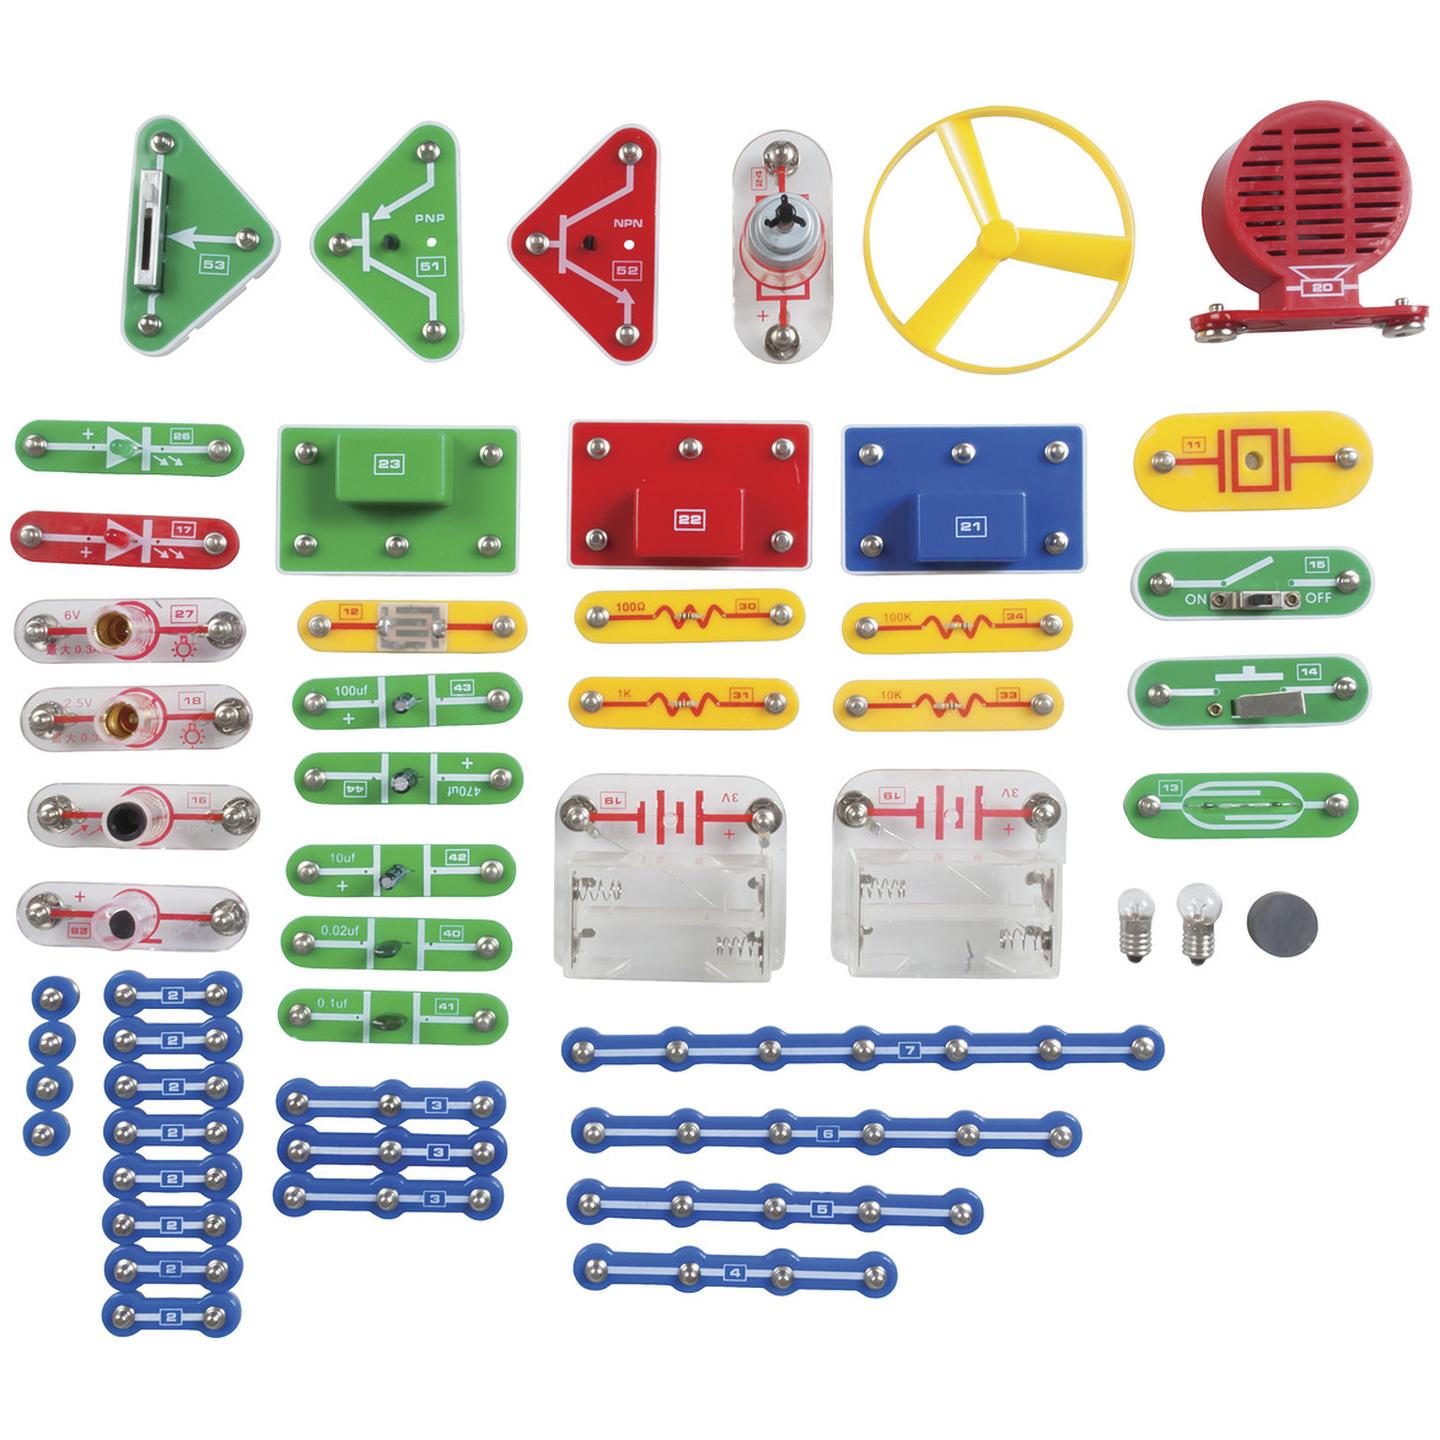 698-in-1 Snap on Electronic Project Kit